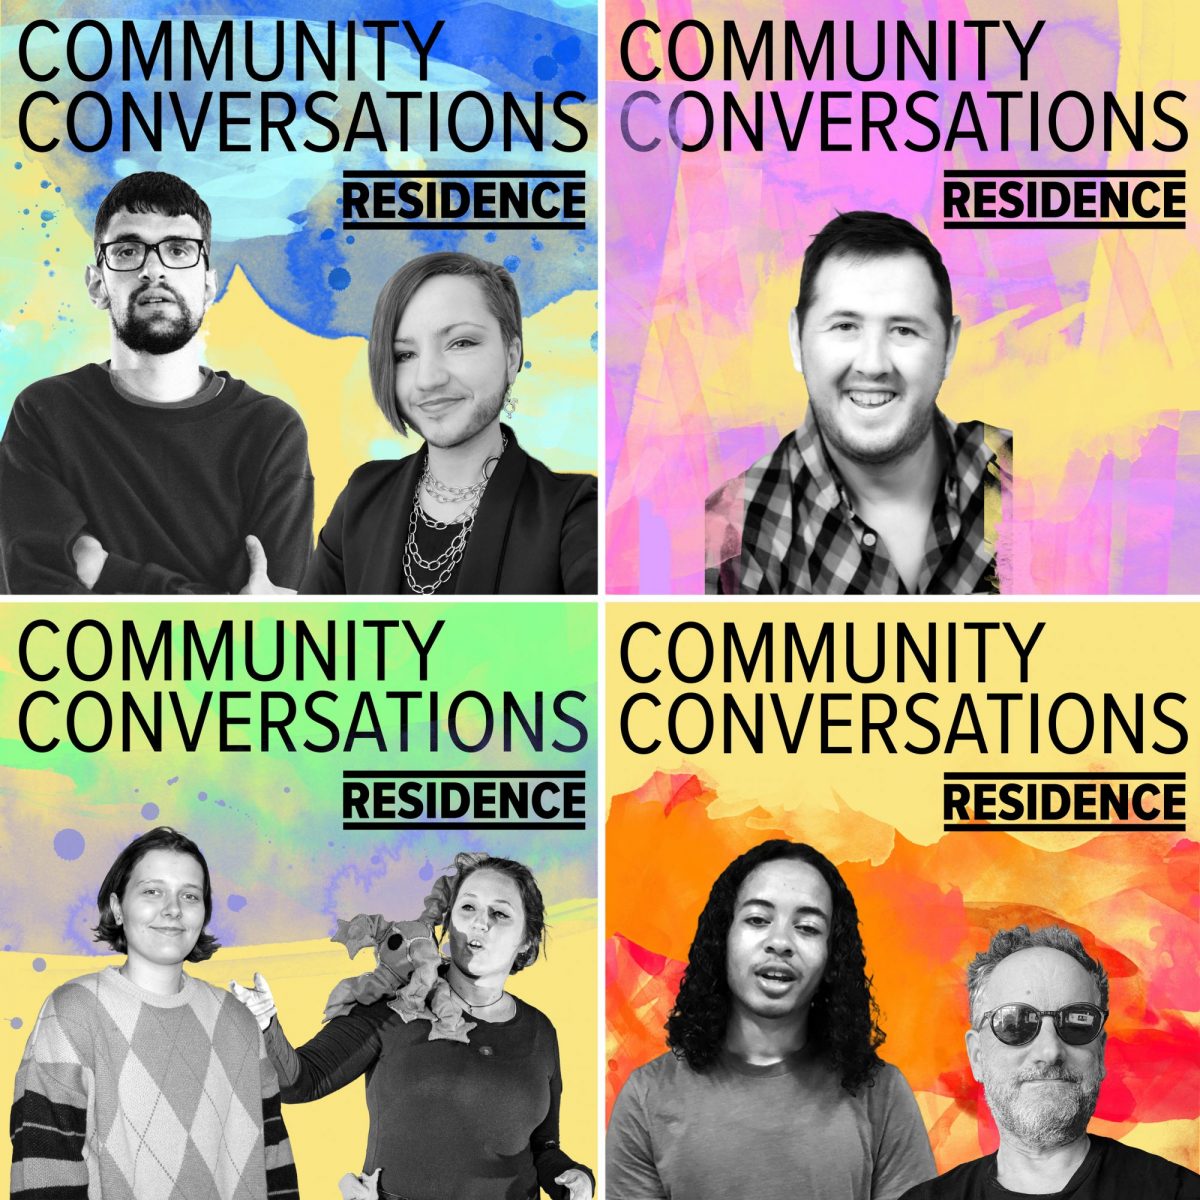 Episode artwork for the Community Conversations podcast